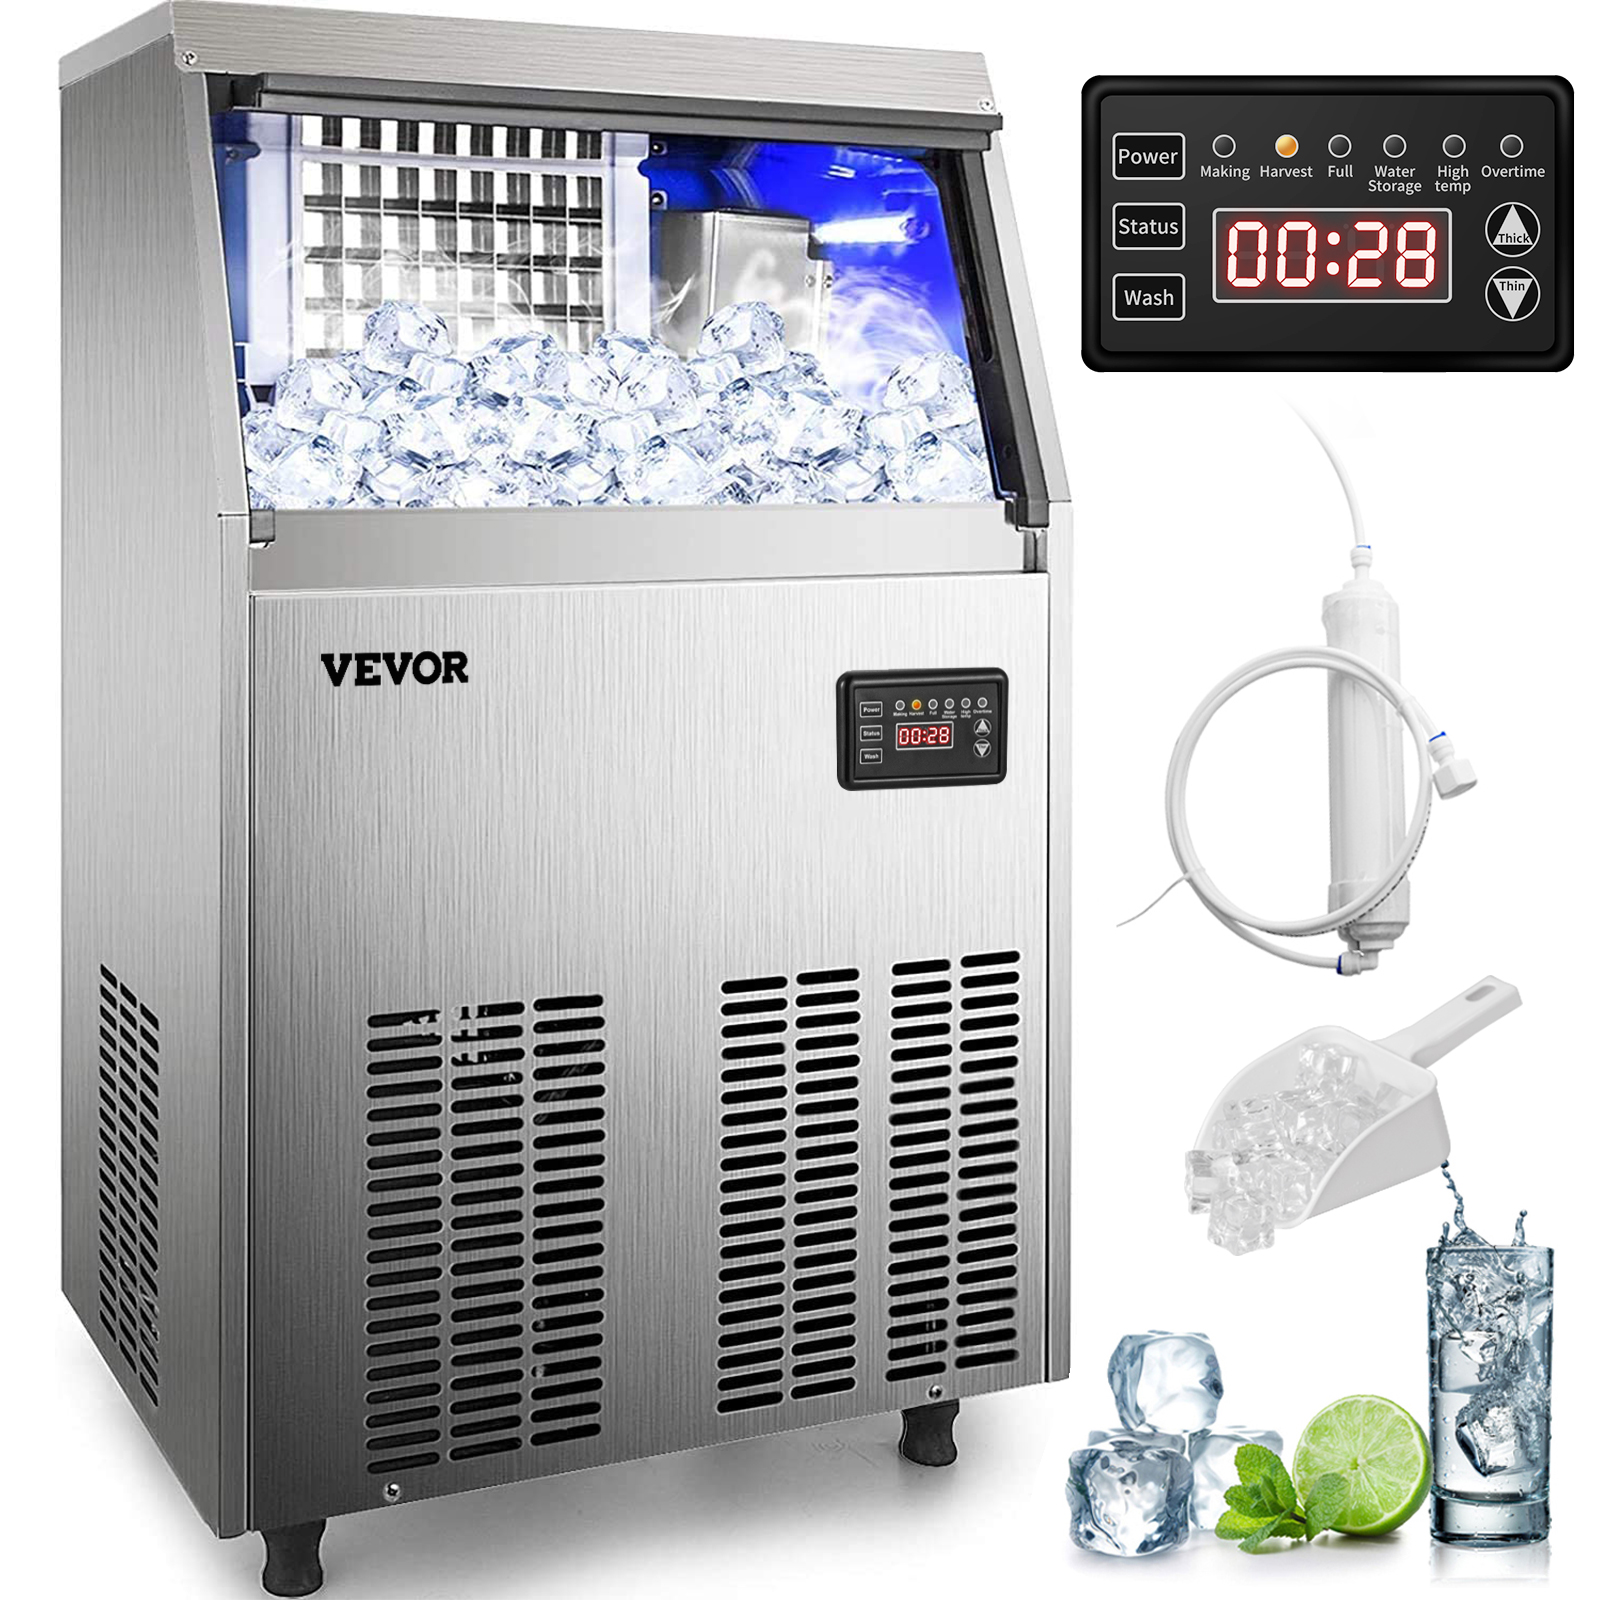 https://d2qc09rl1gfuof.cloudfront.net/product/ZBJ50KGSYP70-5001/commercial-ice-maker-m100-1.2.jpg